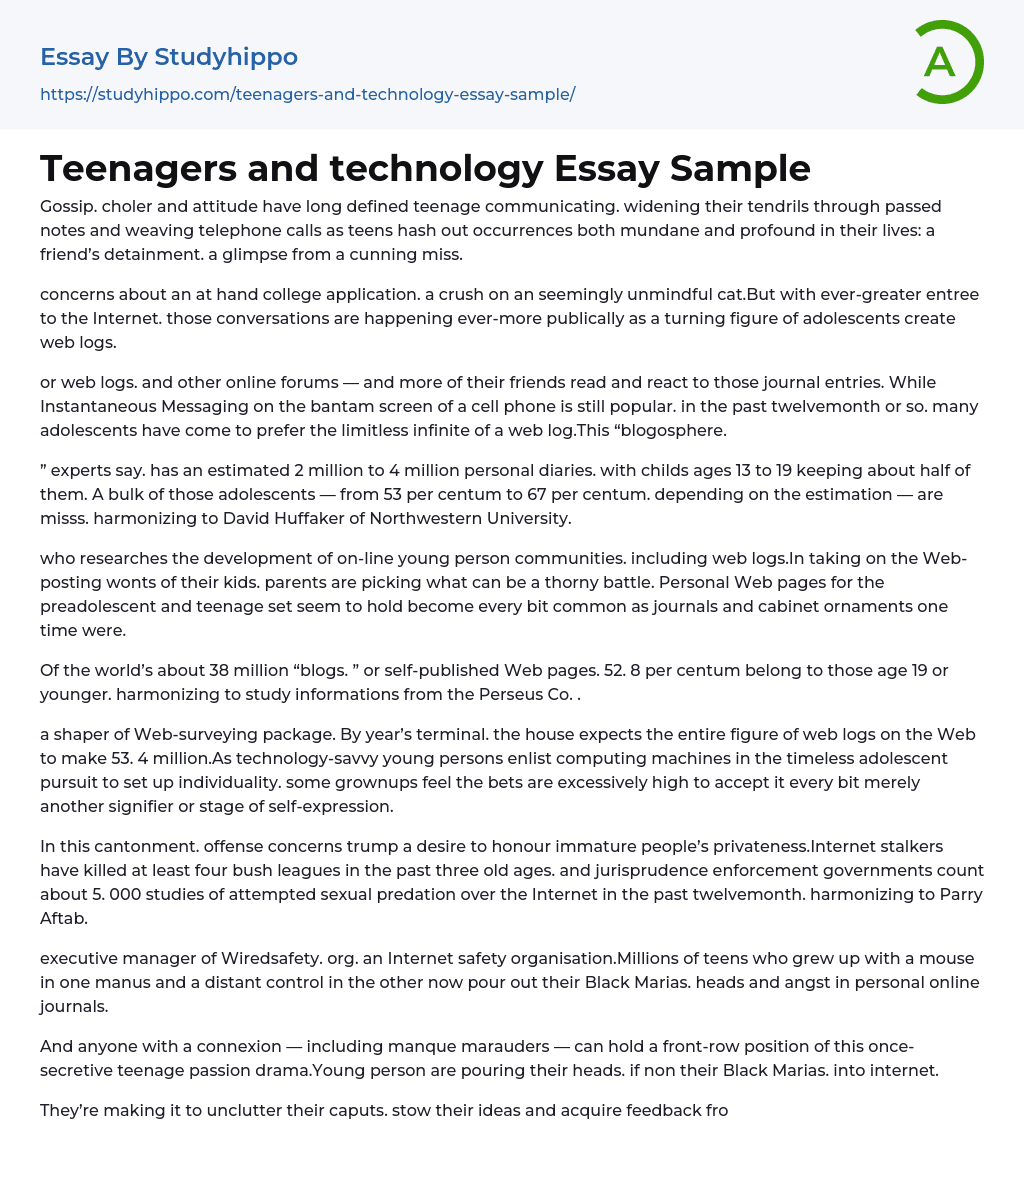 Teenagers and technology Essay Sample